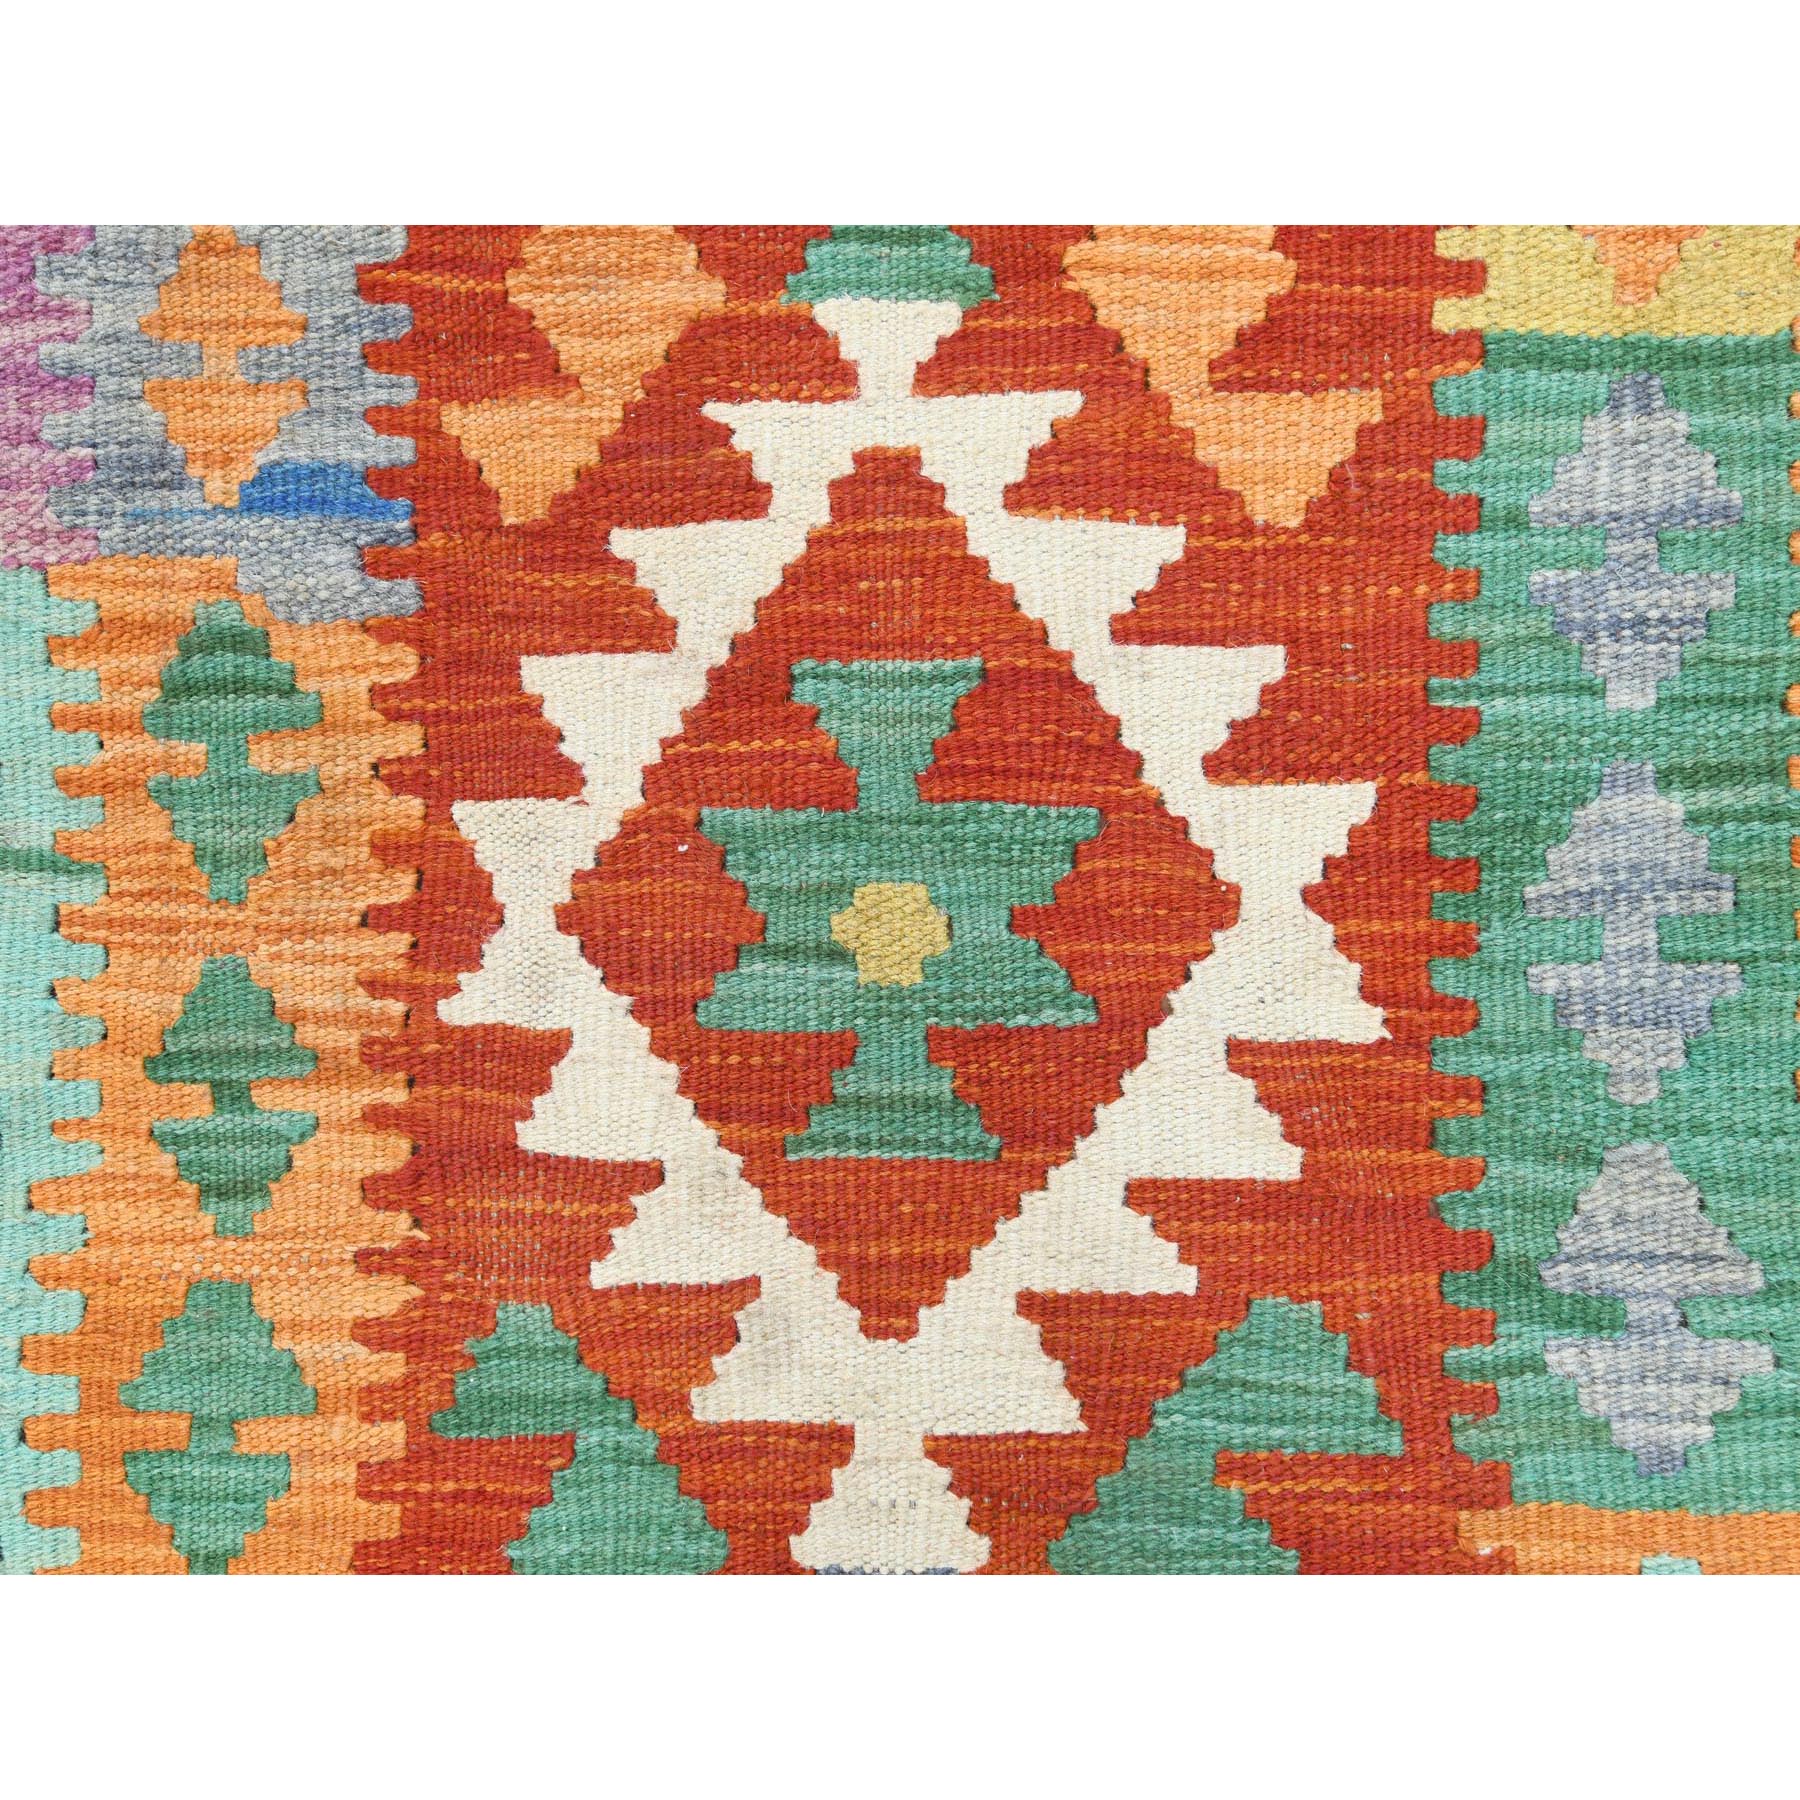 2'6"x16' Colorful, Afghan Kilim with Geometric Design, Hand Woven, Veggie Dyes, Flat Weave, Reversible, Vibrant Wool XL Runner Oriental Rug moa407745